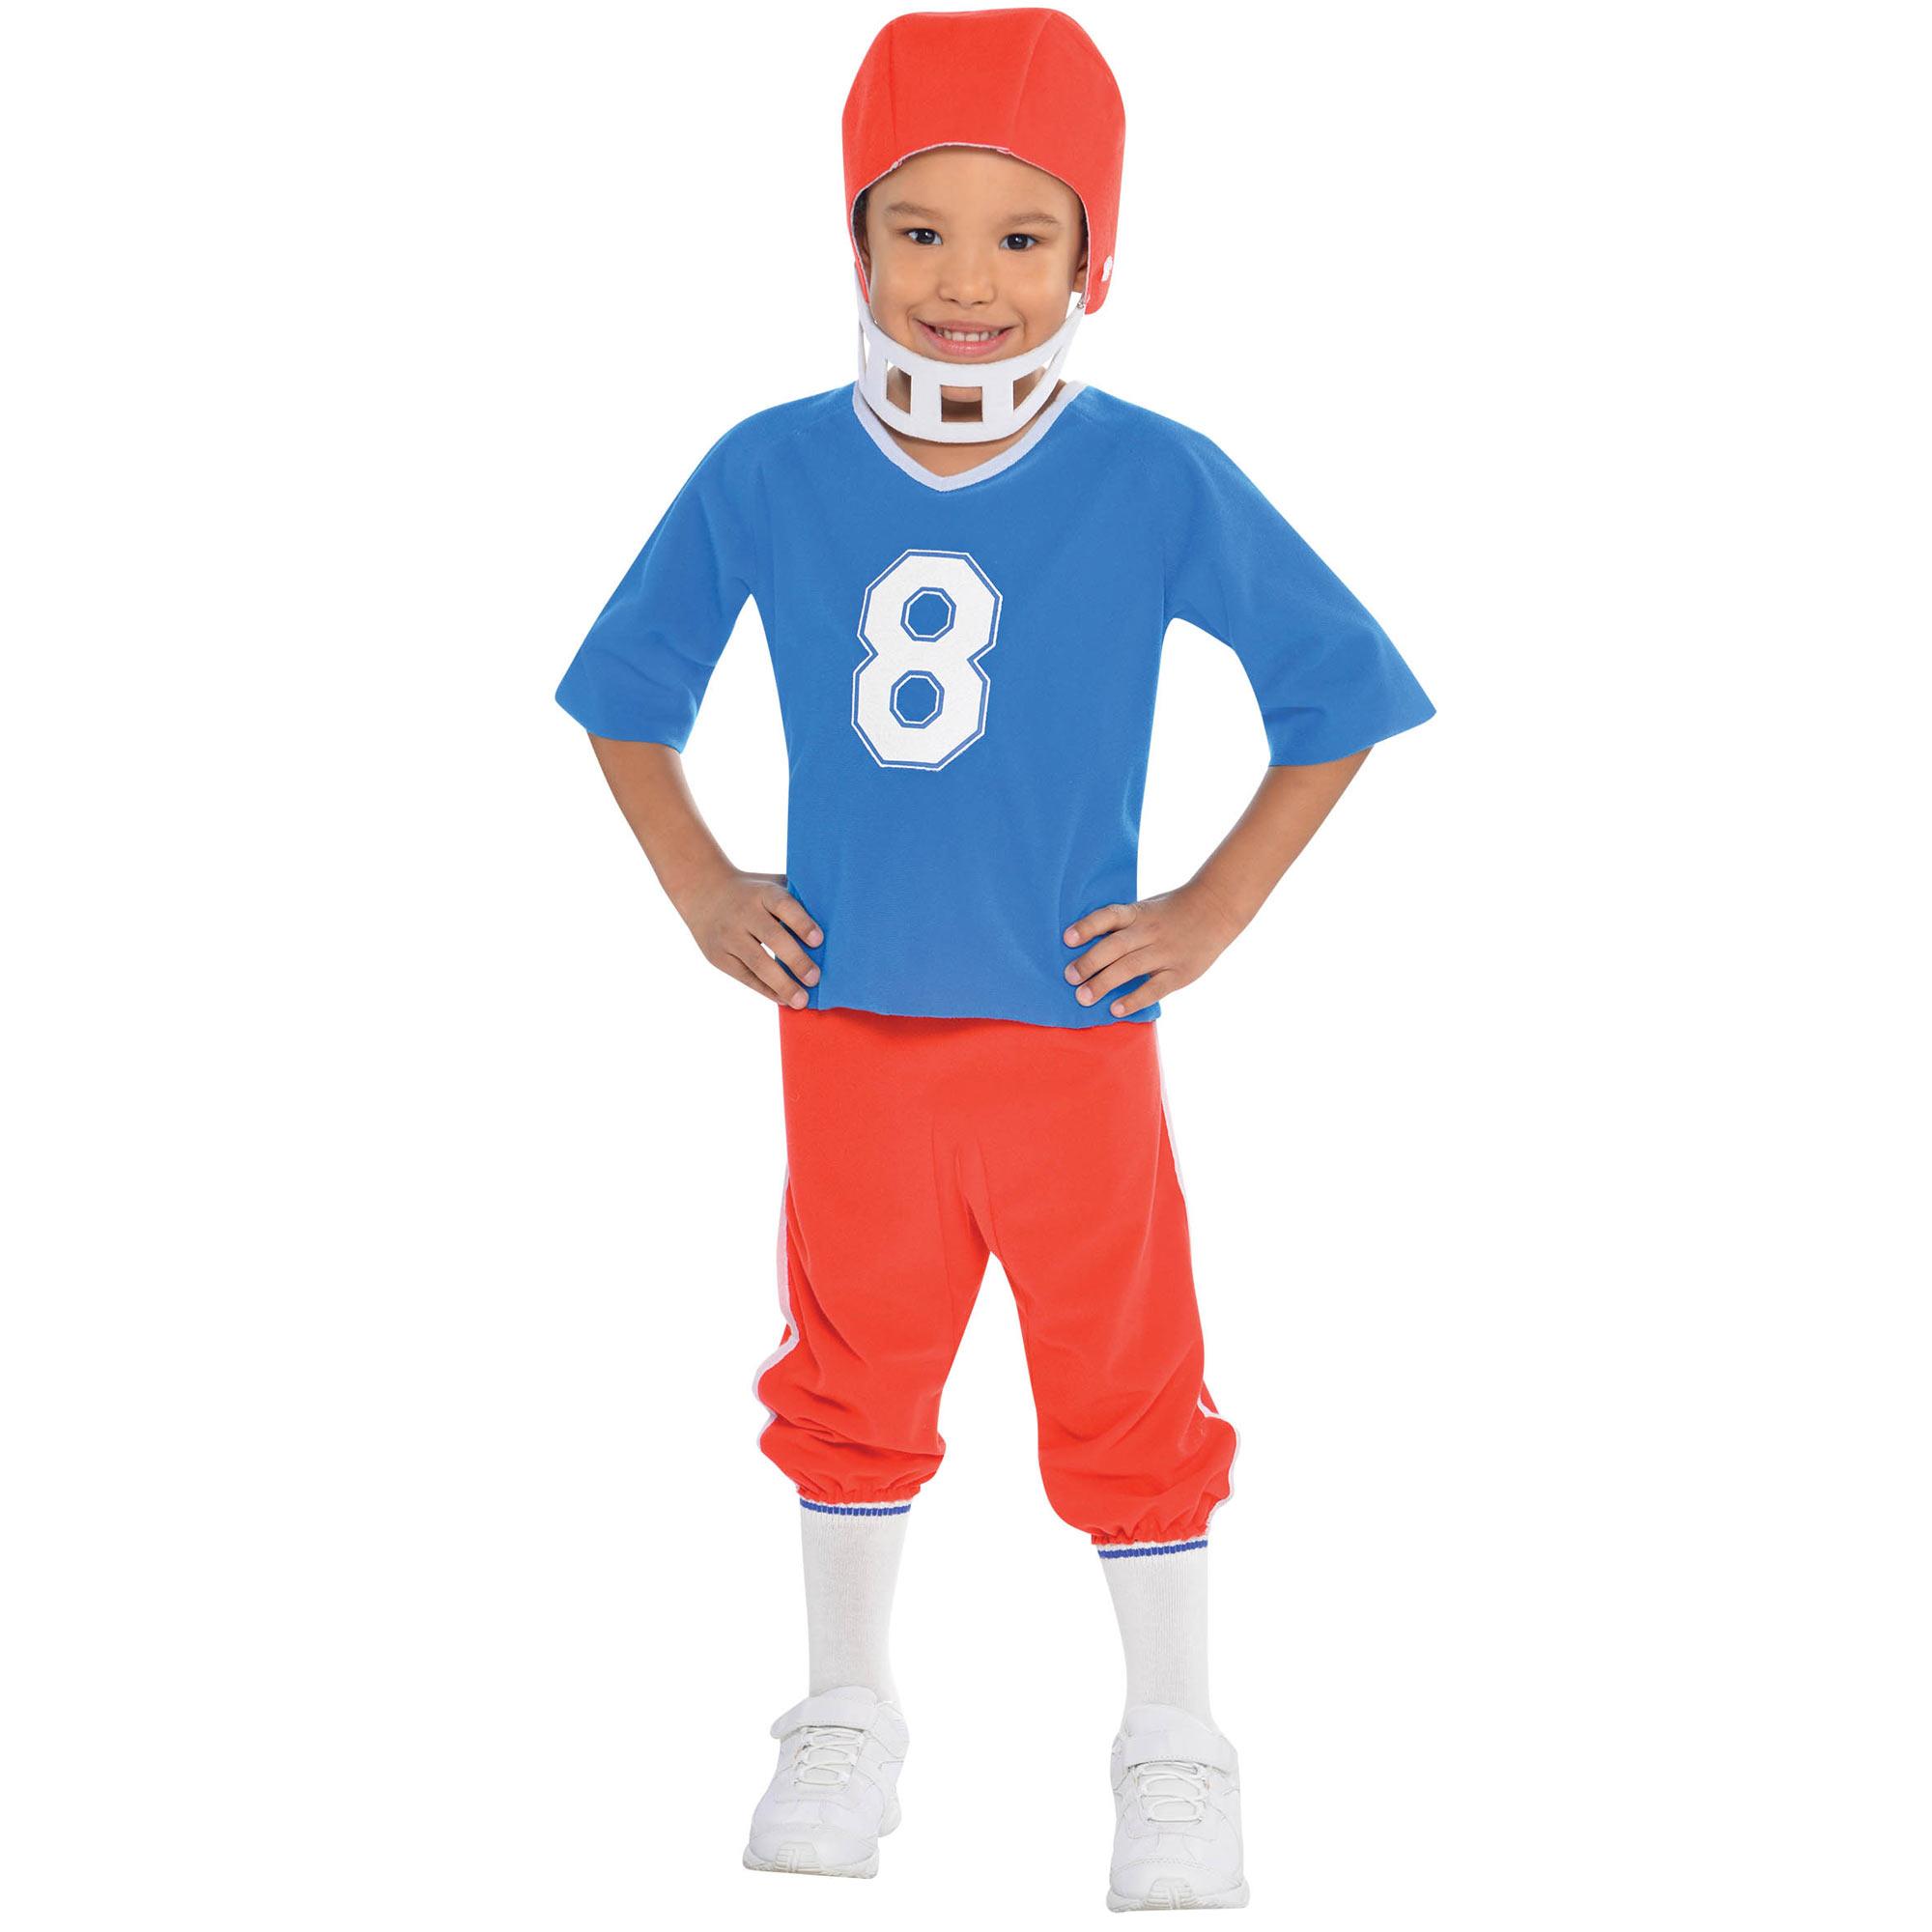 Toddler Little Linebacker Costume Costumes & Apparel - Party Centre